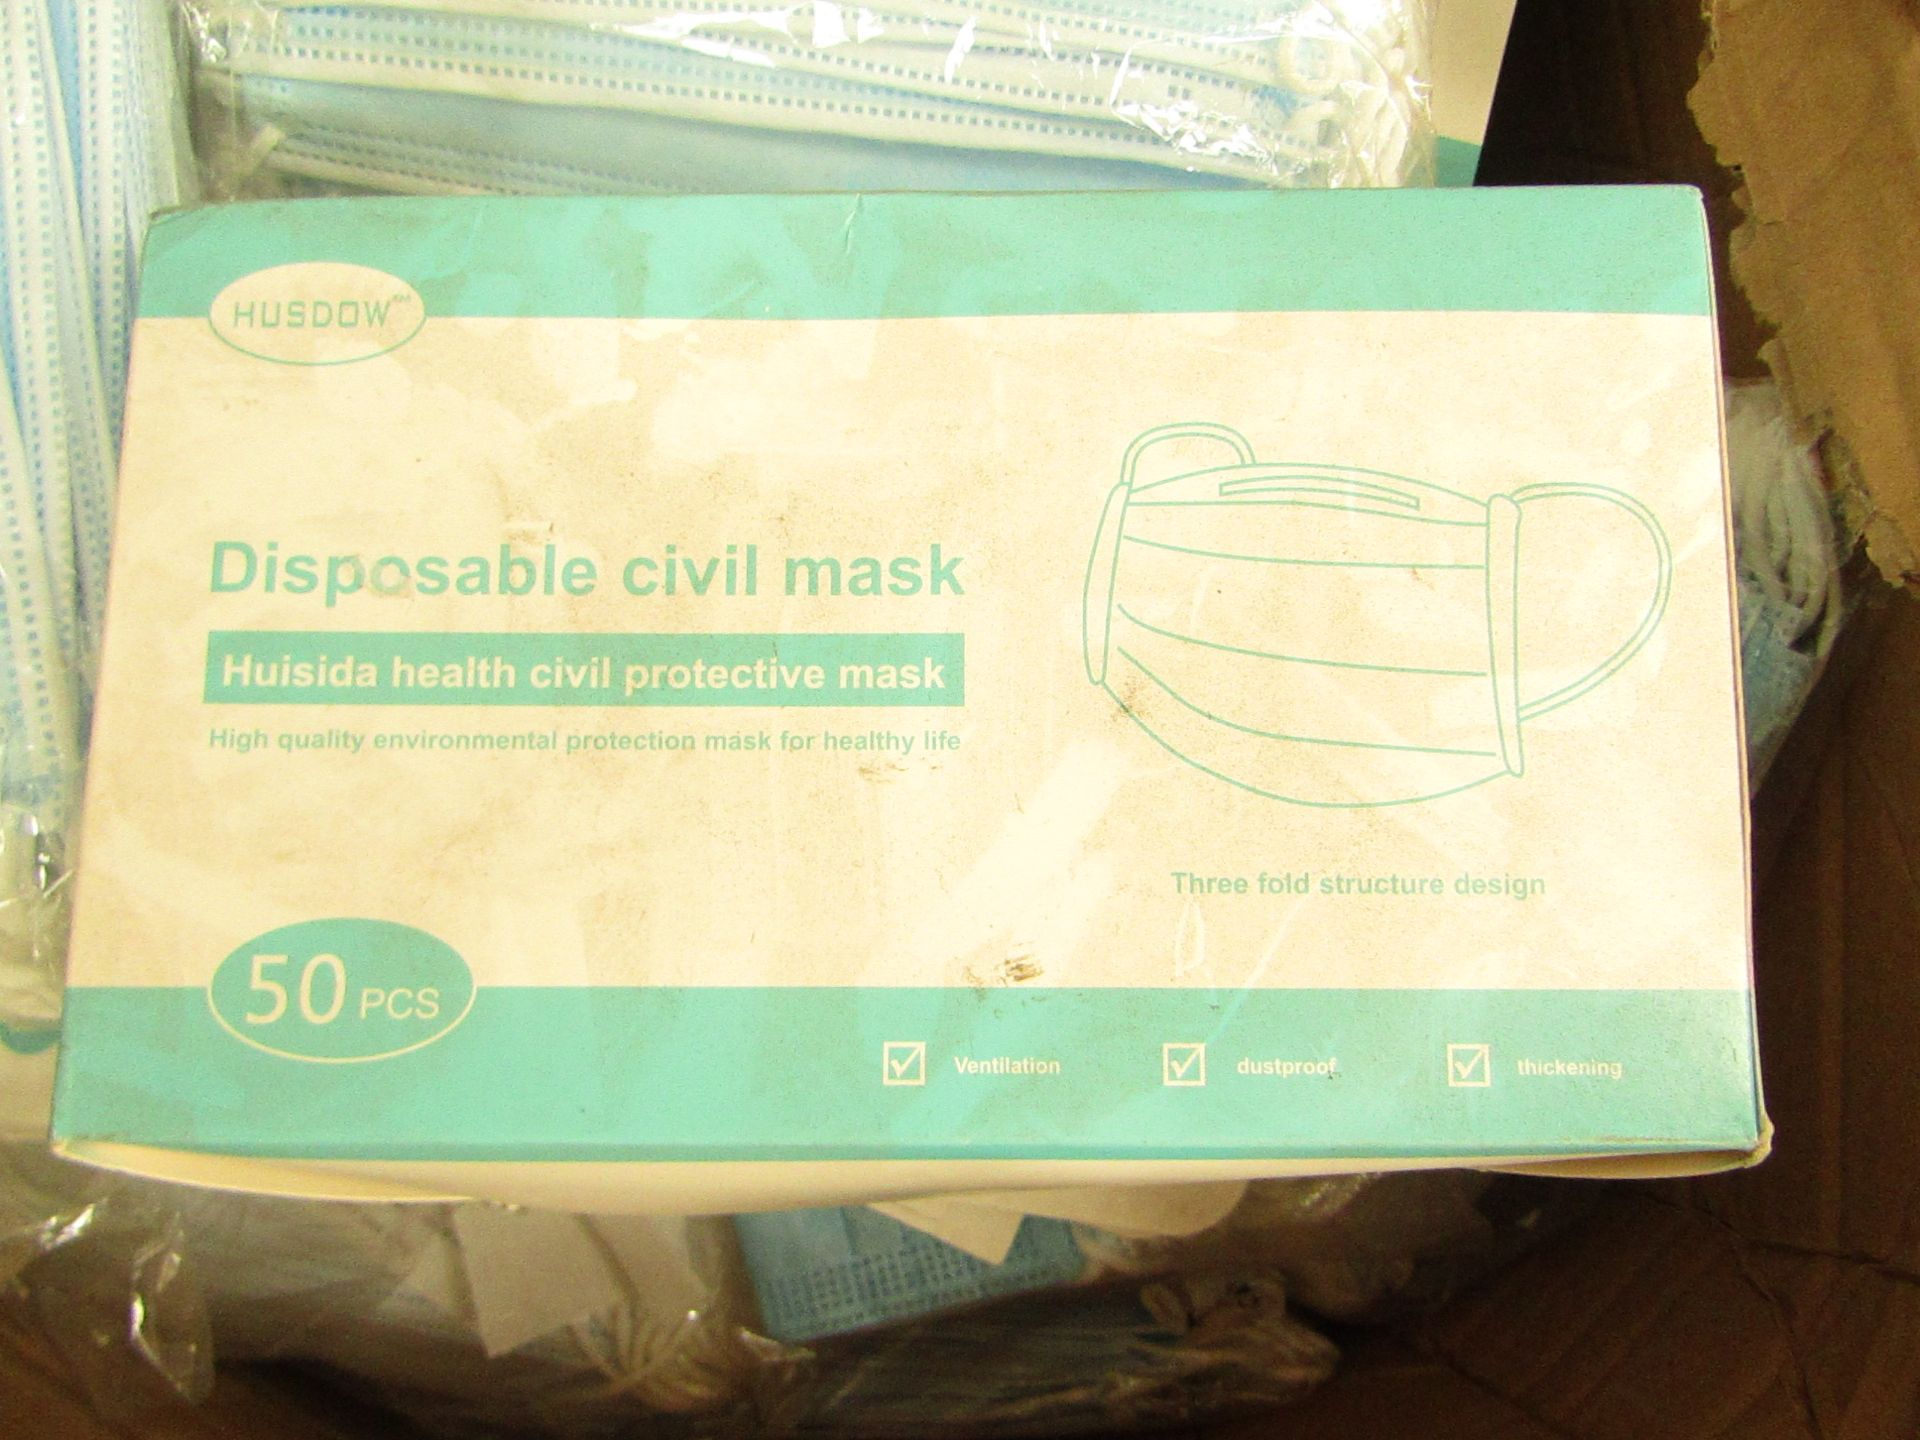 10x Pack of 50x disposable face masks - New & Packaged.